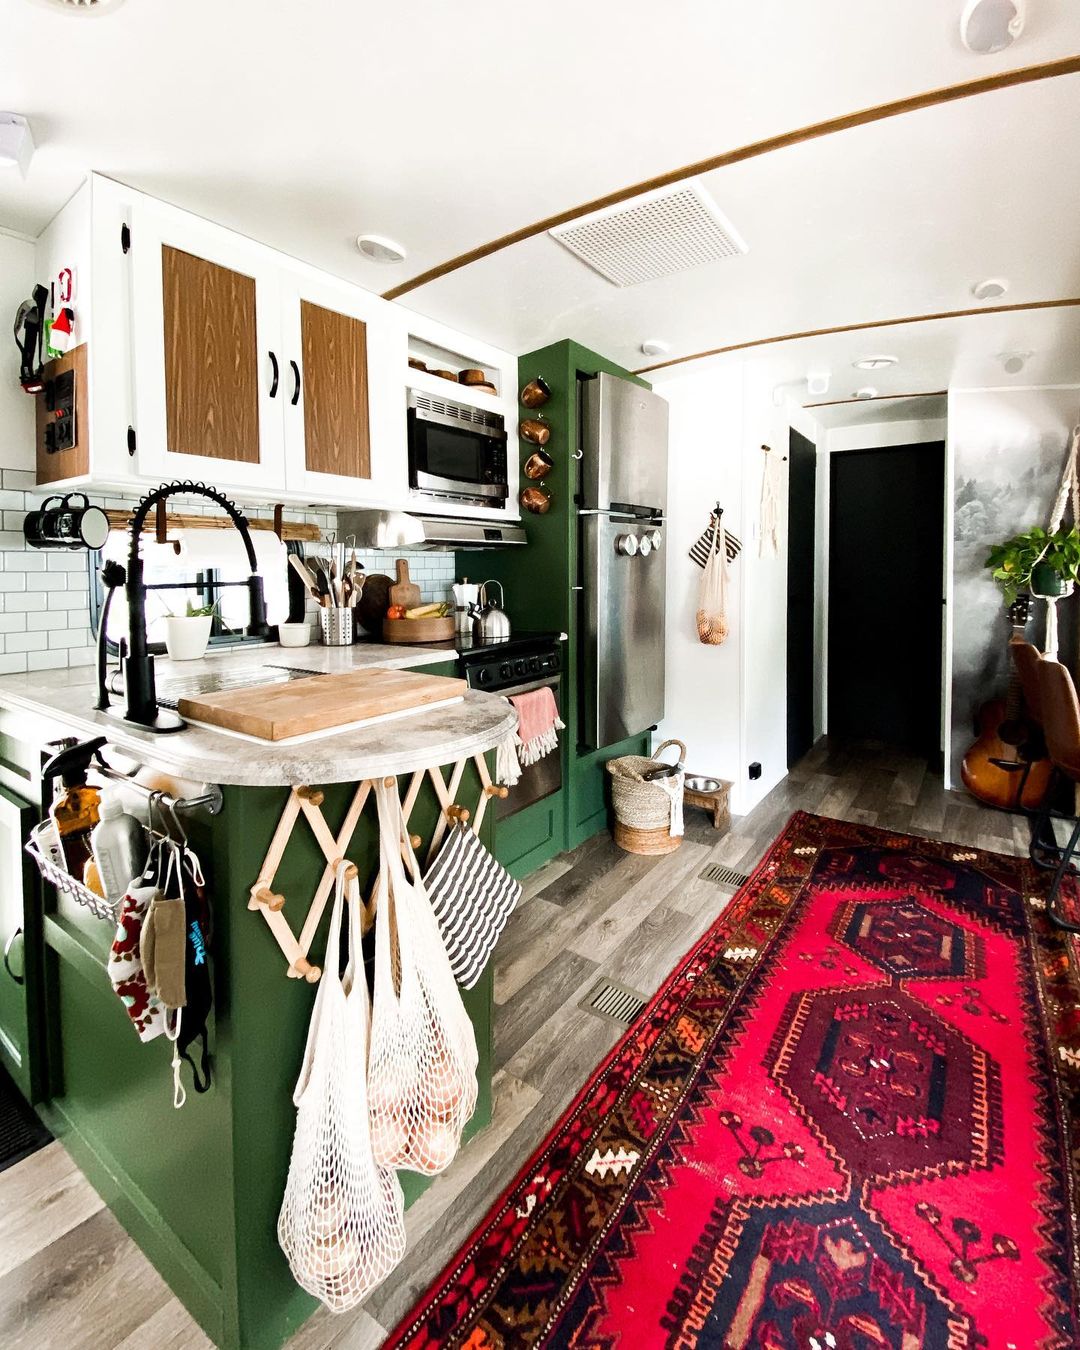 RV kitchen with wall hooks. Photo by Instagram user @place_ofmy_taste.